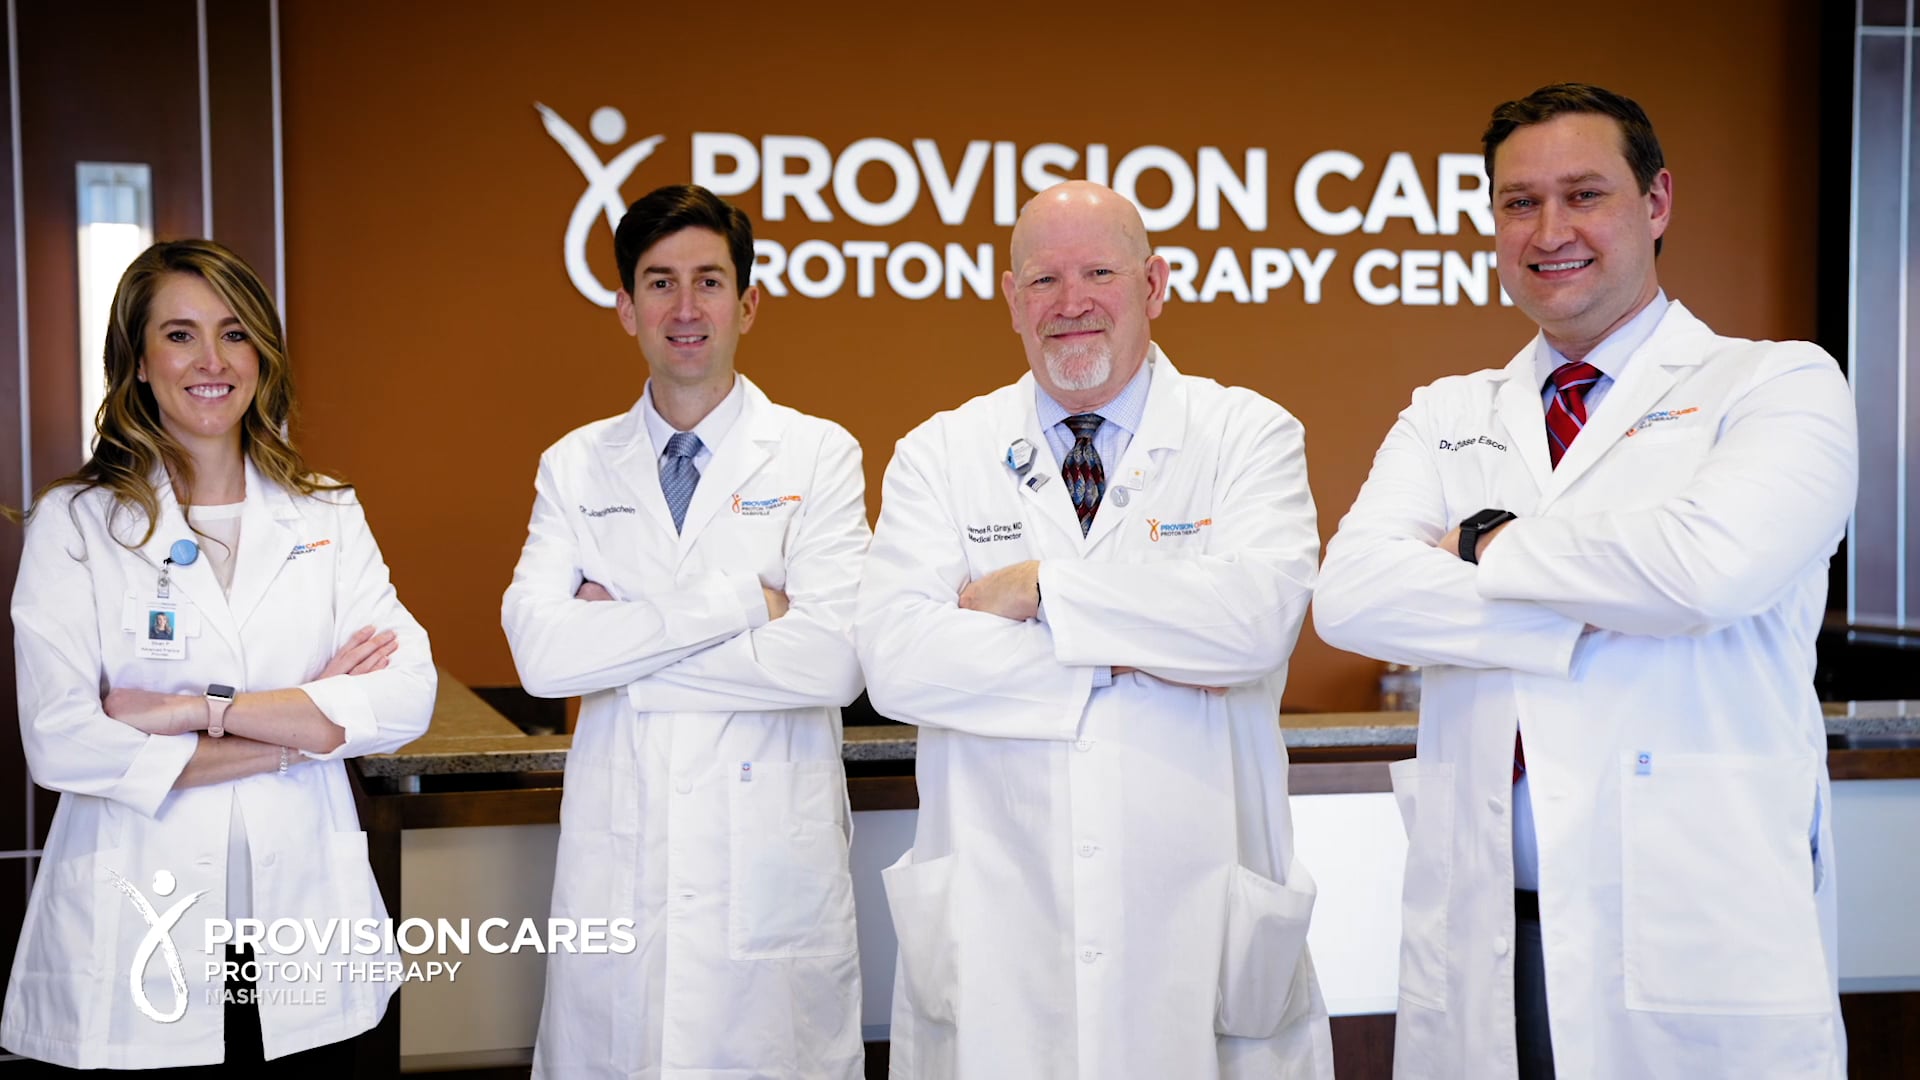 Provision CARES - Advanced Cancer Treatment in Middle Tennessee